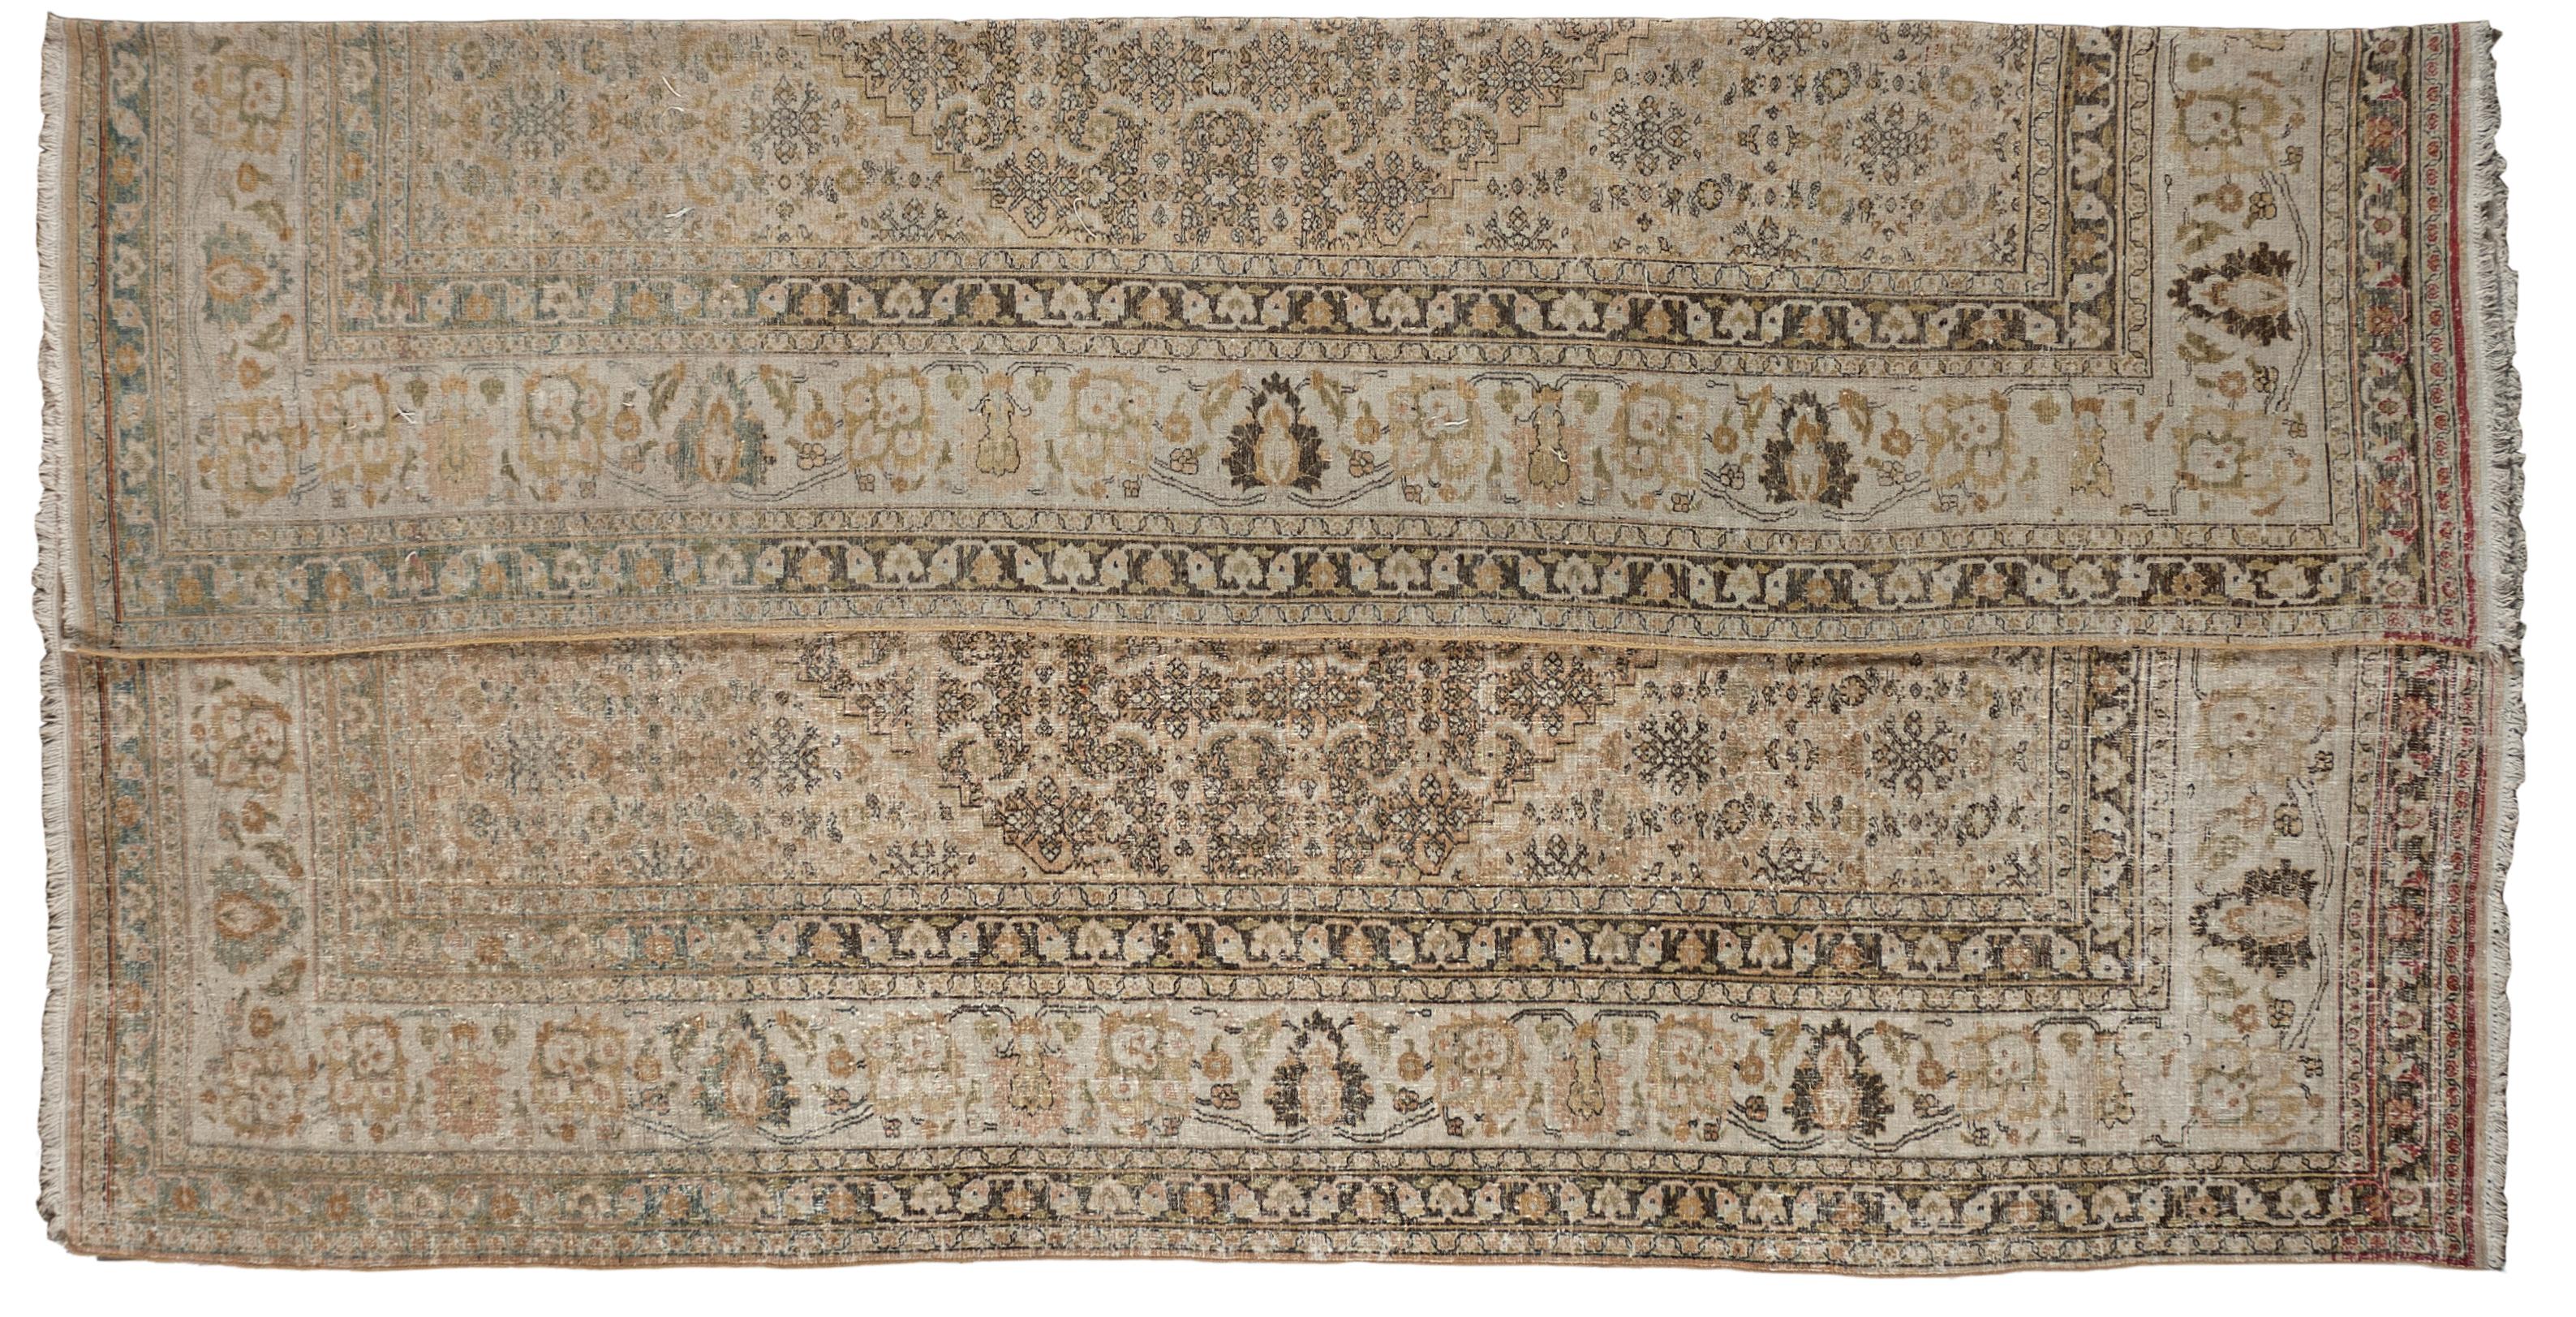 This antique distressed Mahal is an all wool handmade and hand knotted rug. This distinctive area rug that has a center medallion and wide stylized floral frame is from the 20th century and was made in Iran. The name is derived from the Mahallat